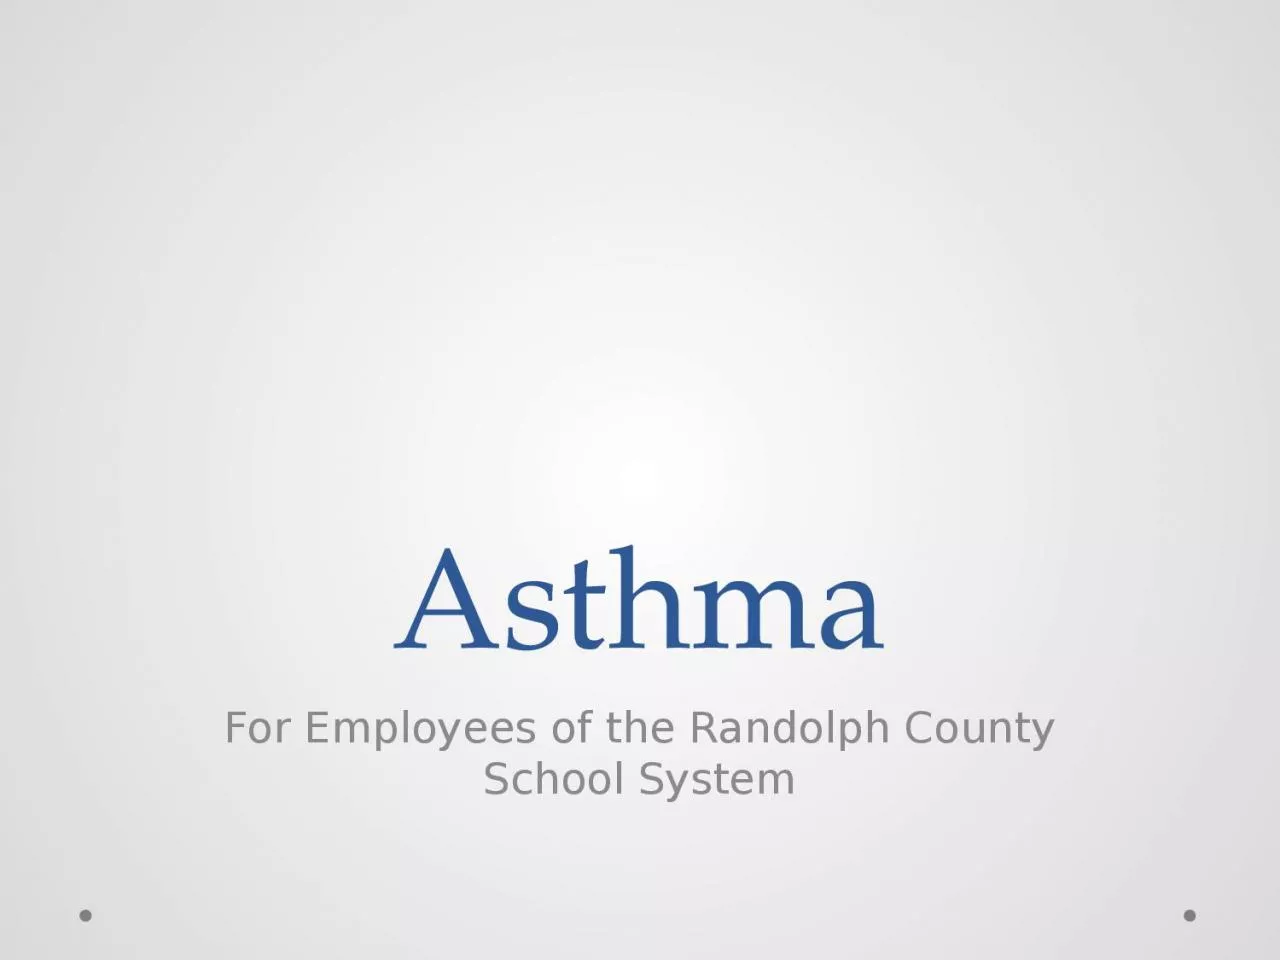 Asthma For Employees of the Randolph County School System